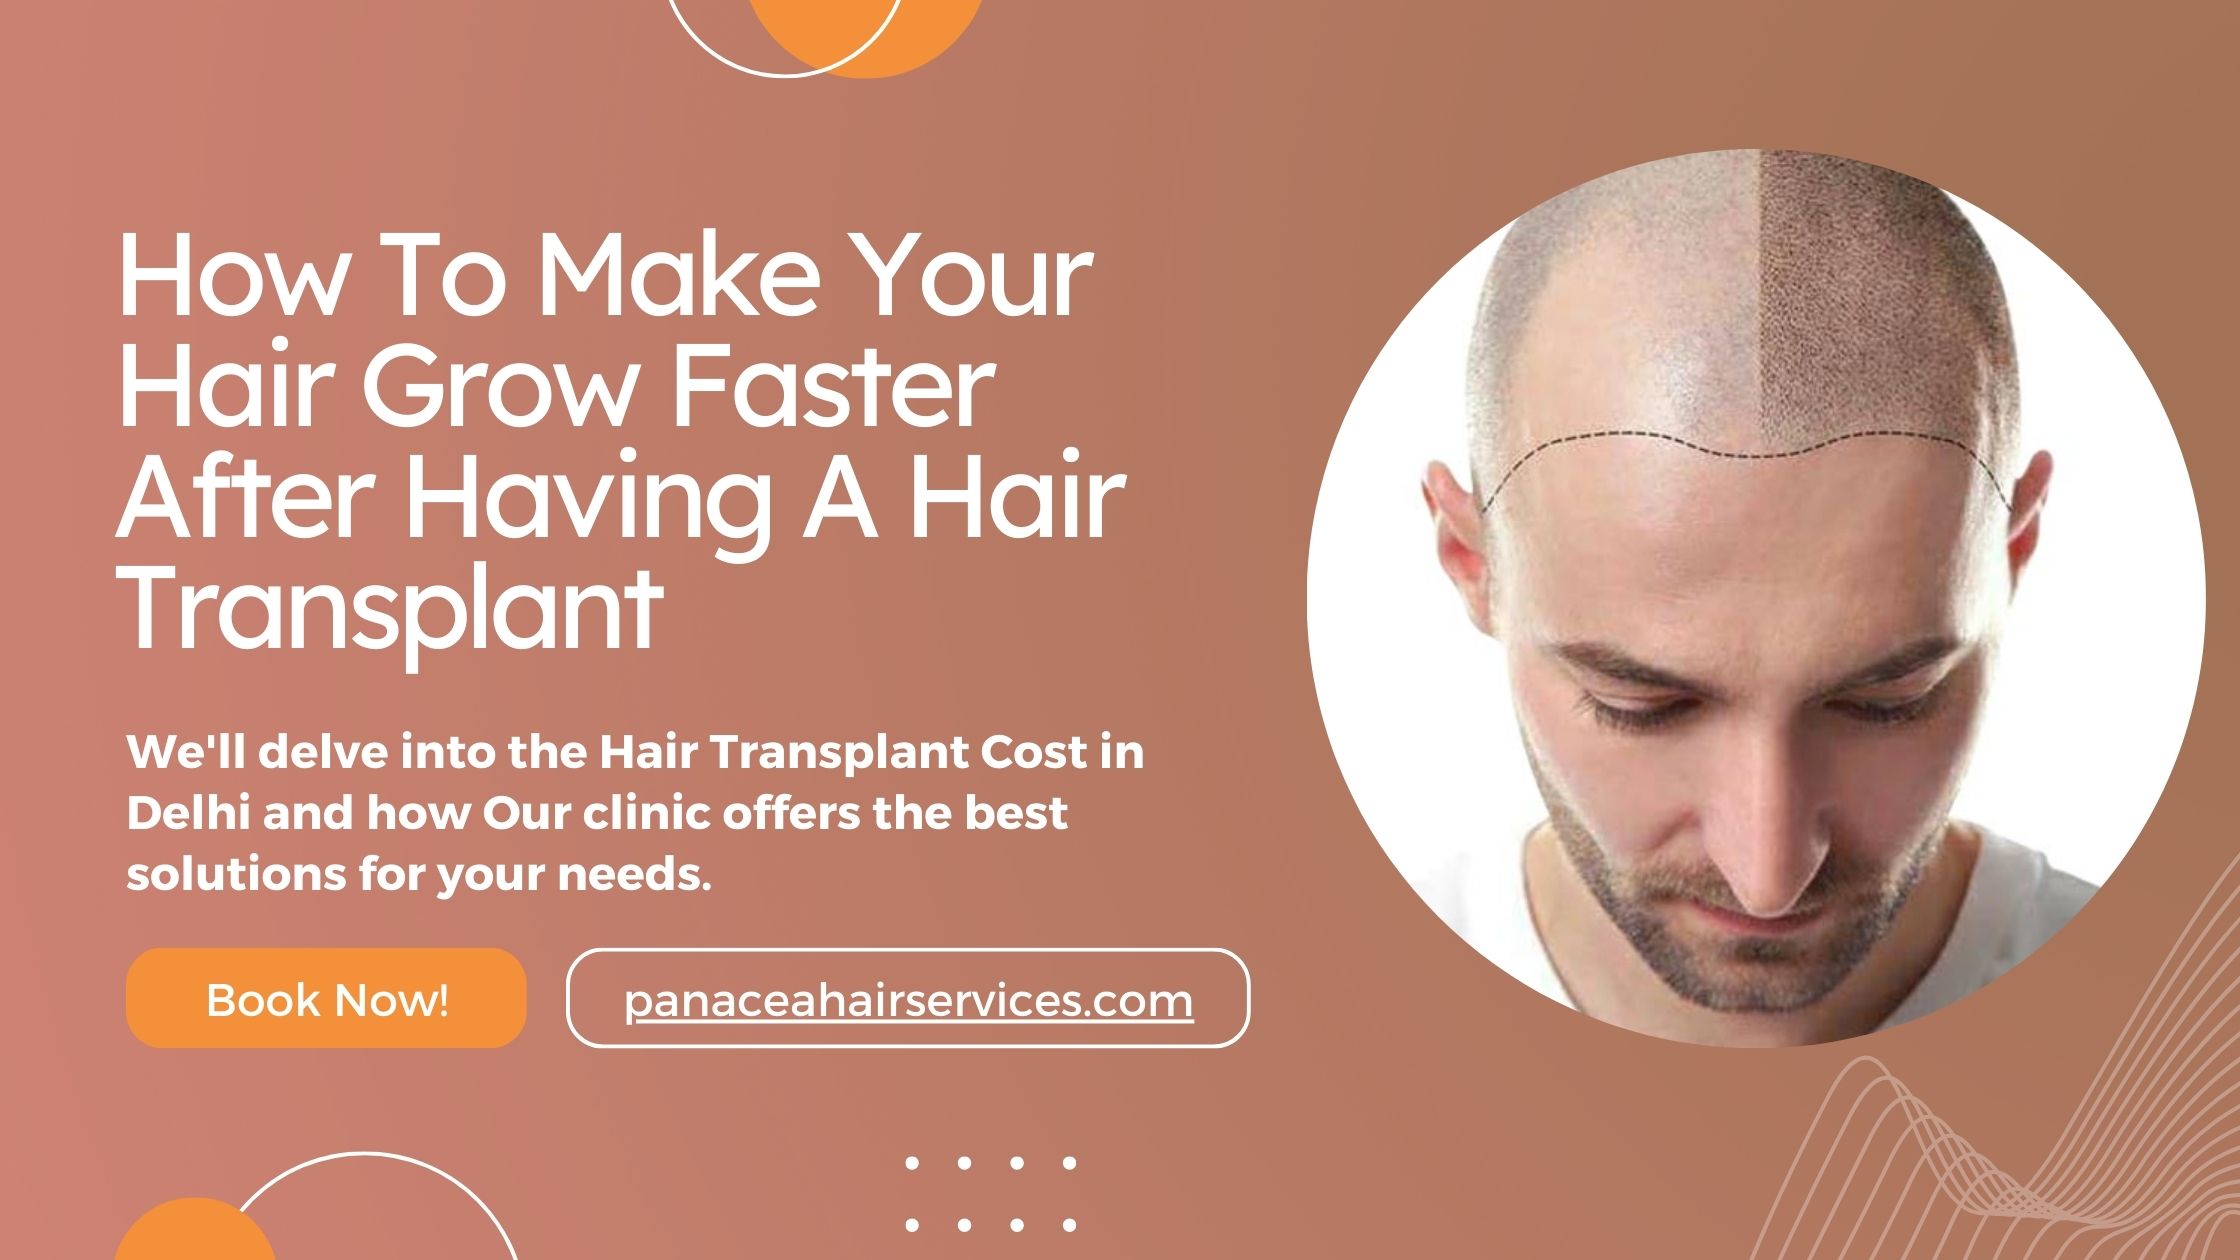 How To Make Your Hair Grow Faster After Having A Hair Transplant